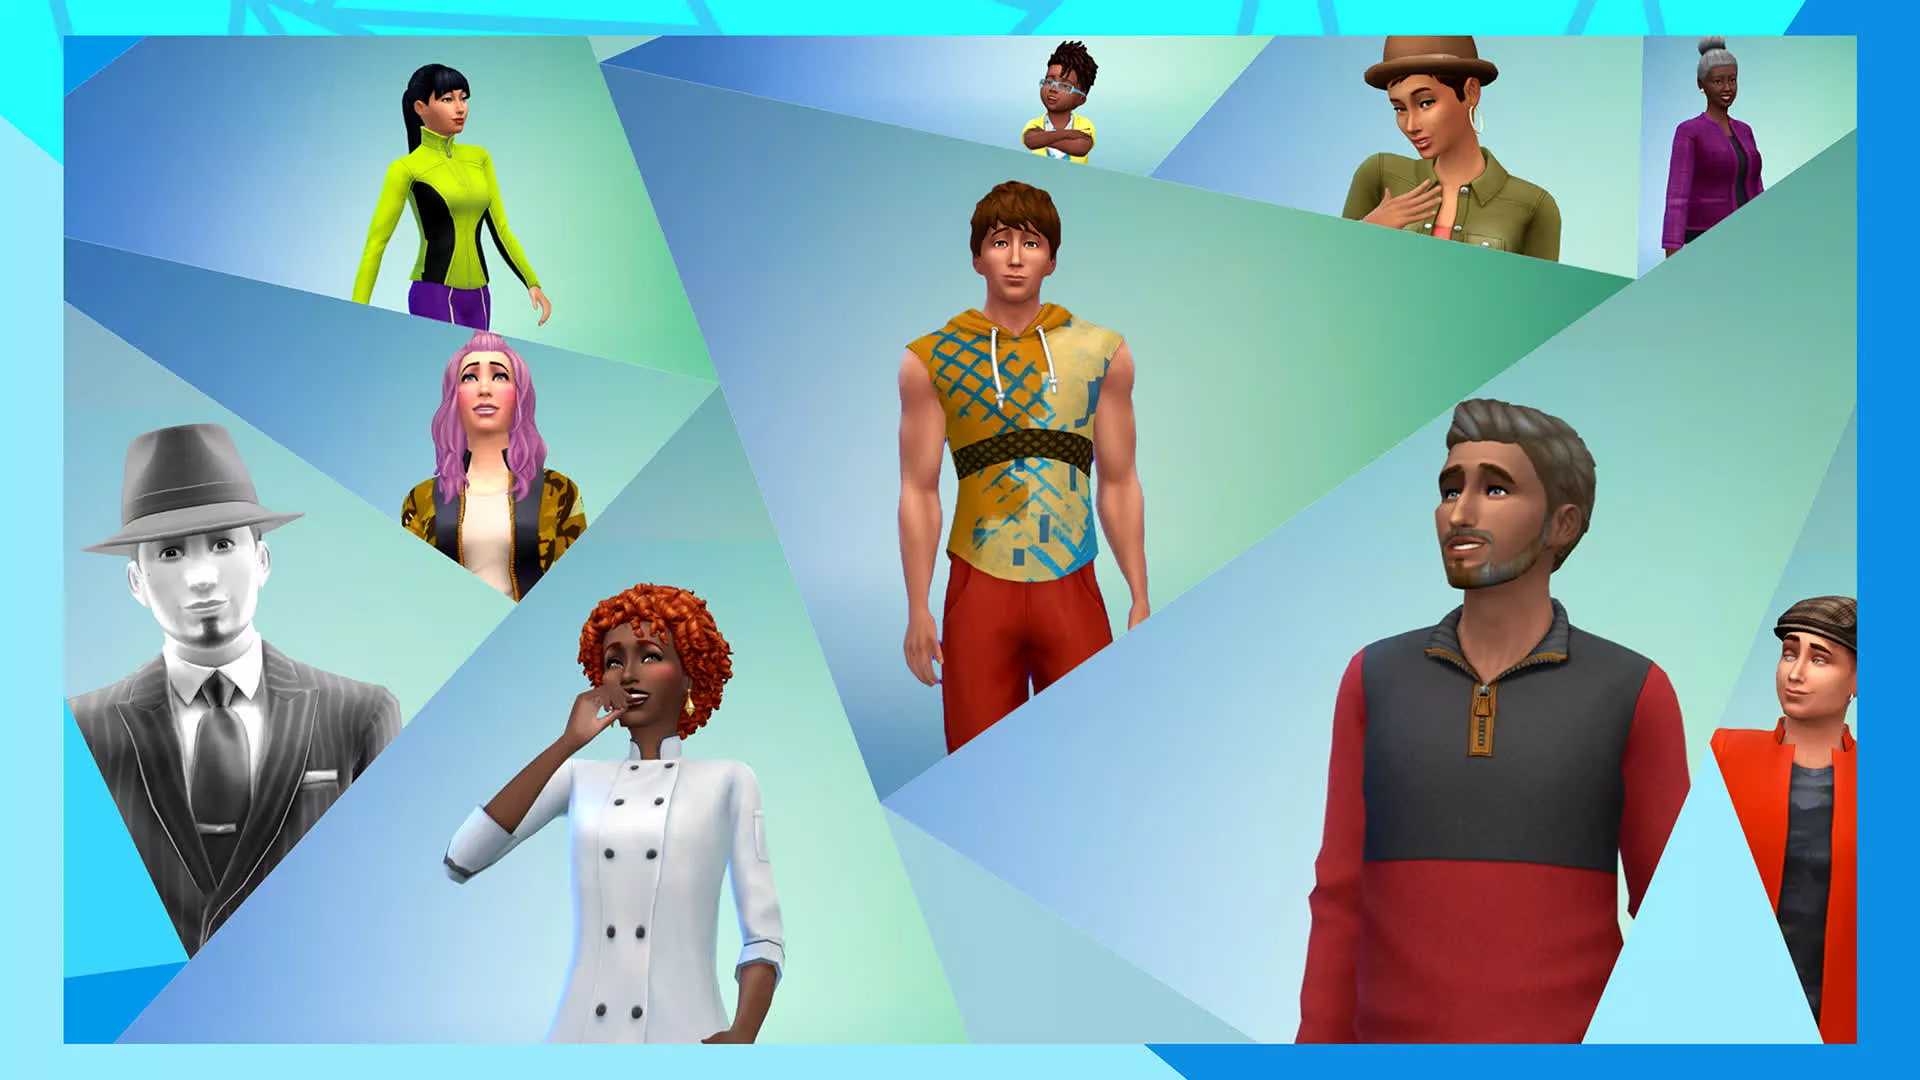 The Sims 5 will be free-to-play according to a leaked job ad